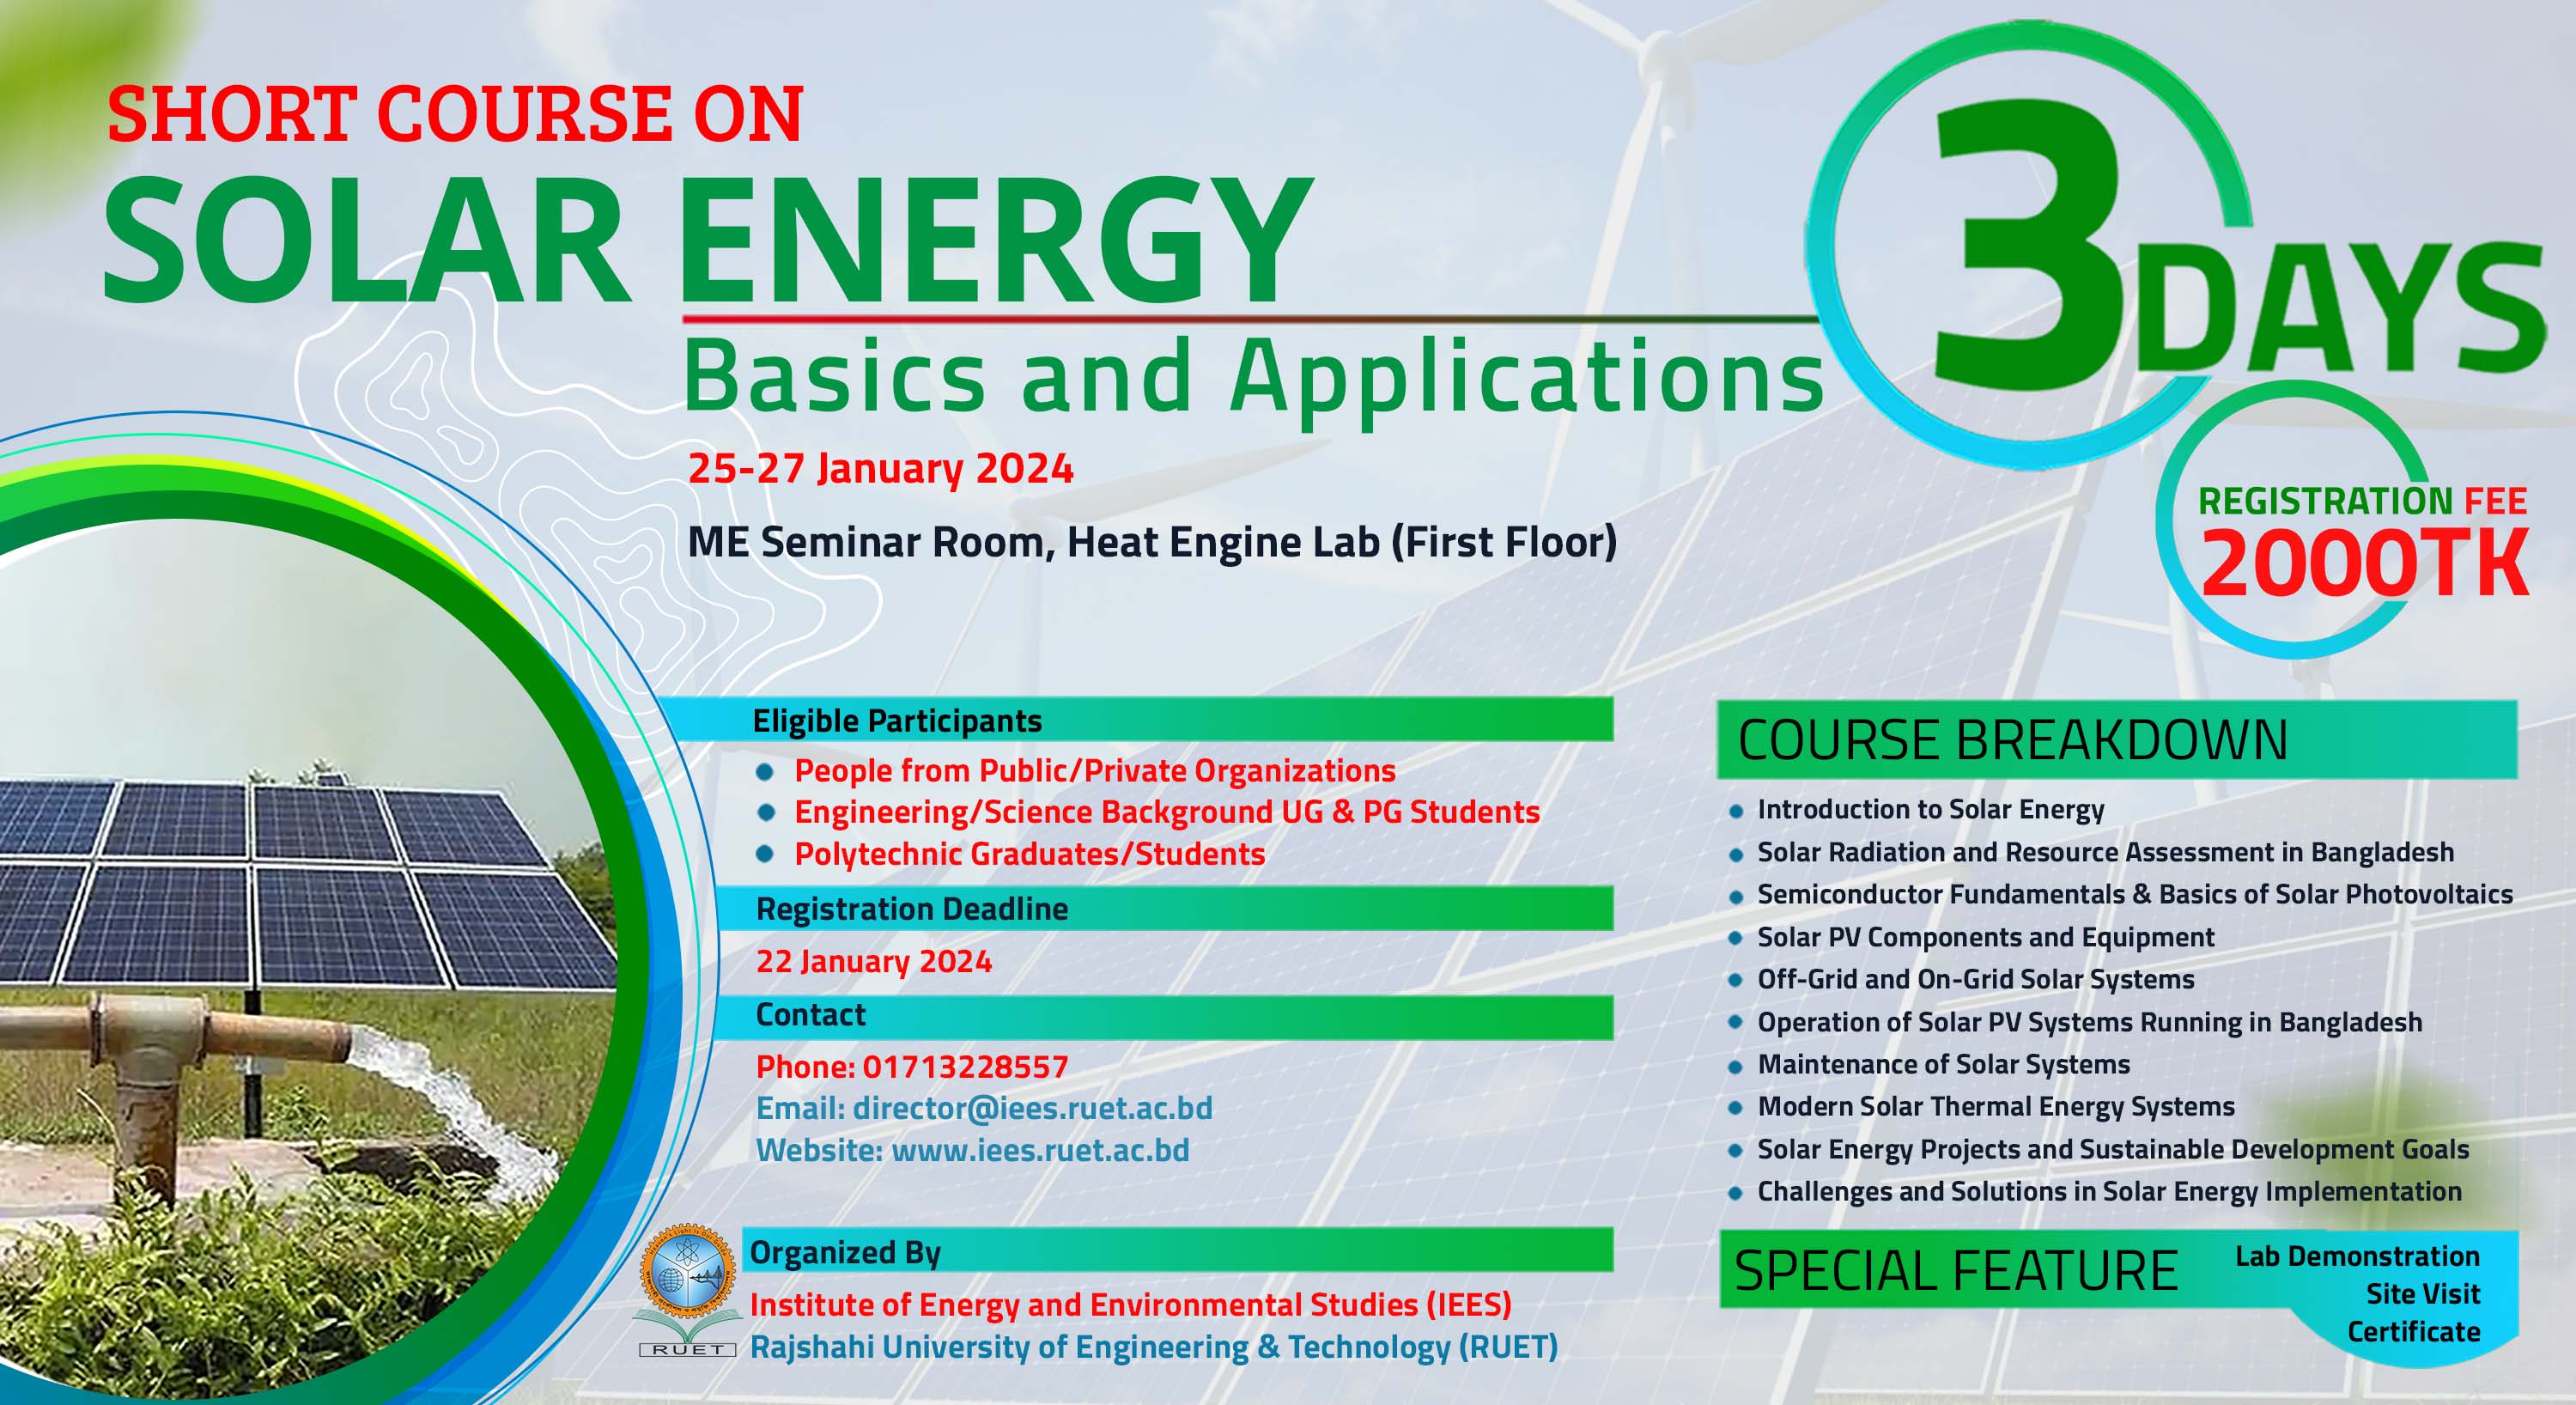 Short Course on Solar Energy: Basics and Applications by IEES